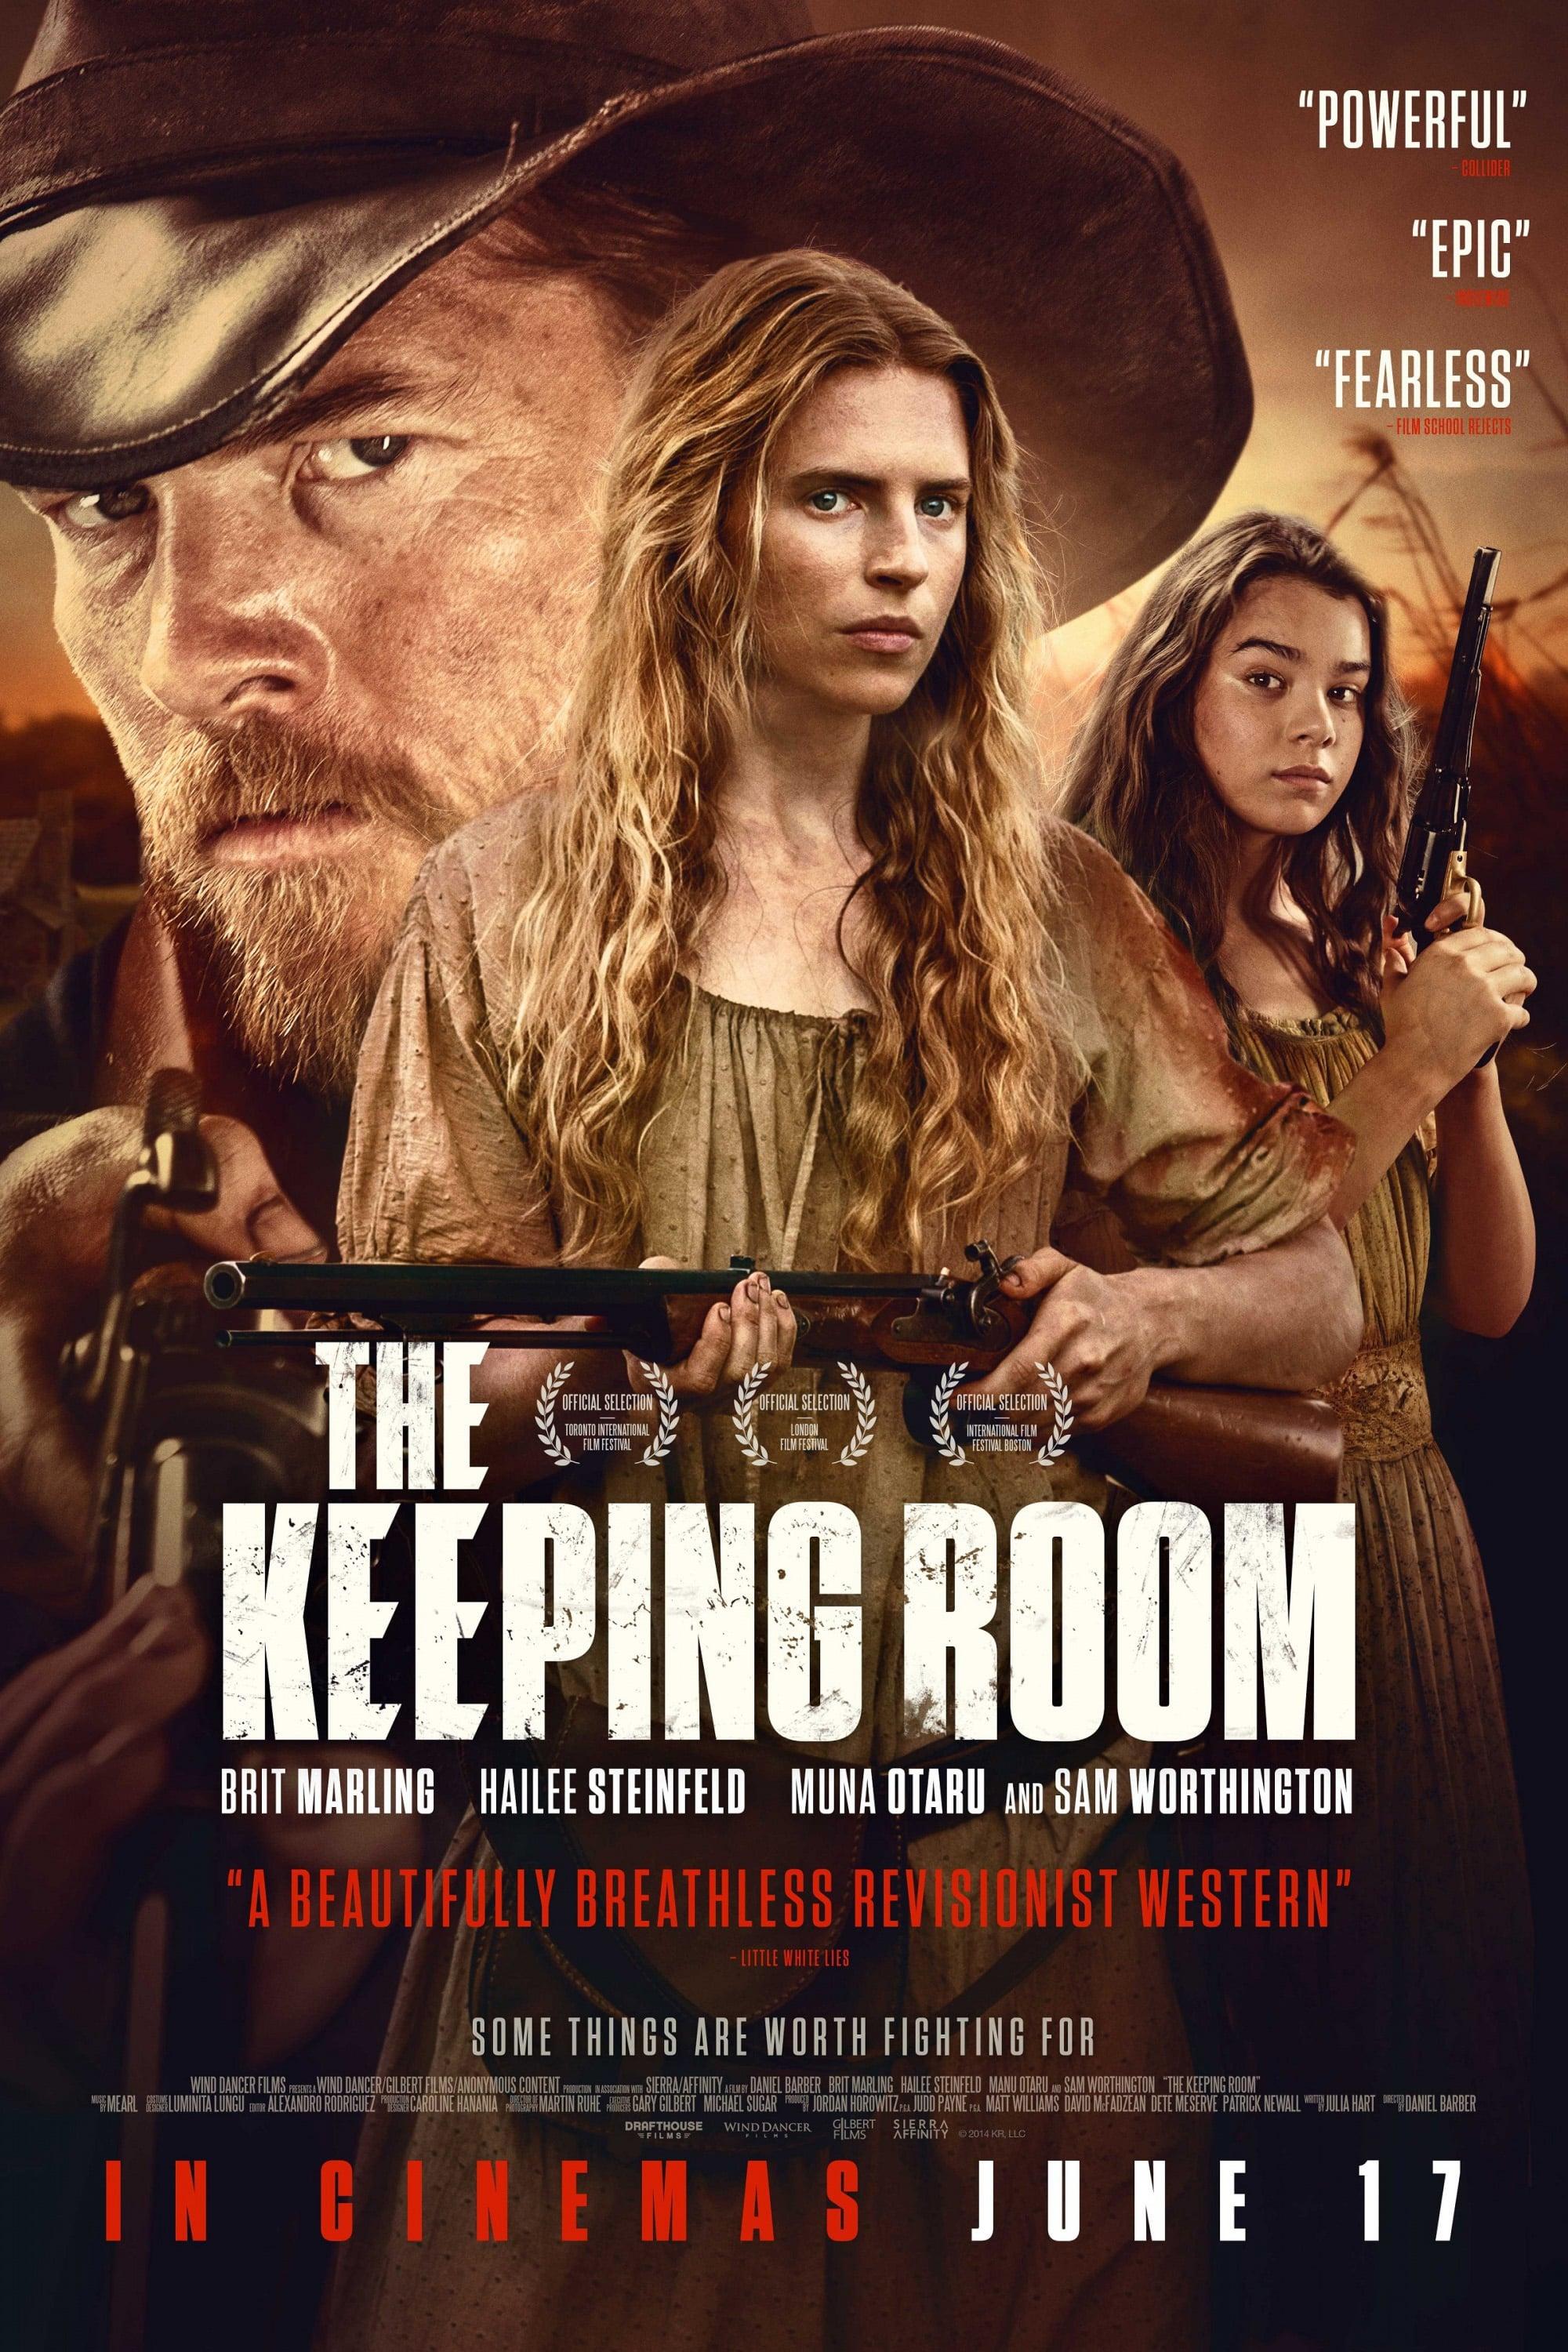 The Keeping Room poster